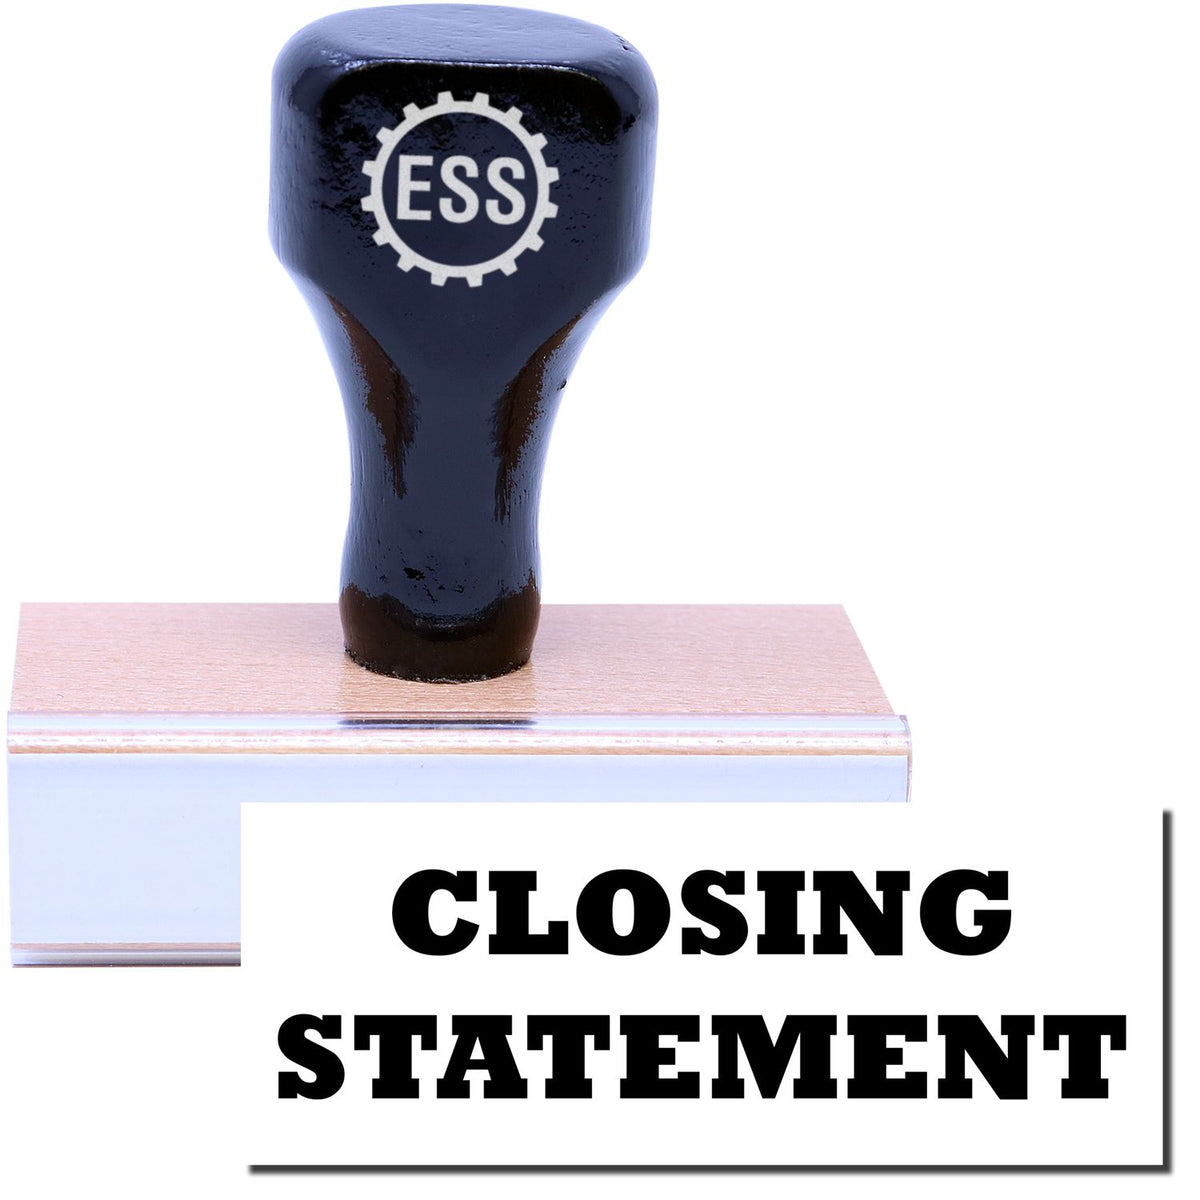 A stock office rubber stamp with a stamped image showing how the text &quot;CLOSING STATEMENT&quot; is displayed after stamping.